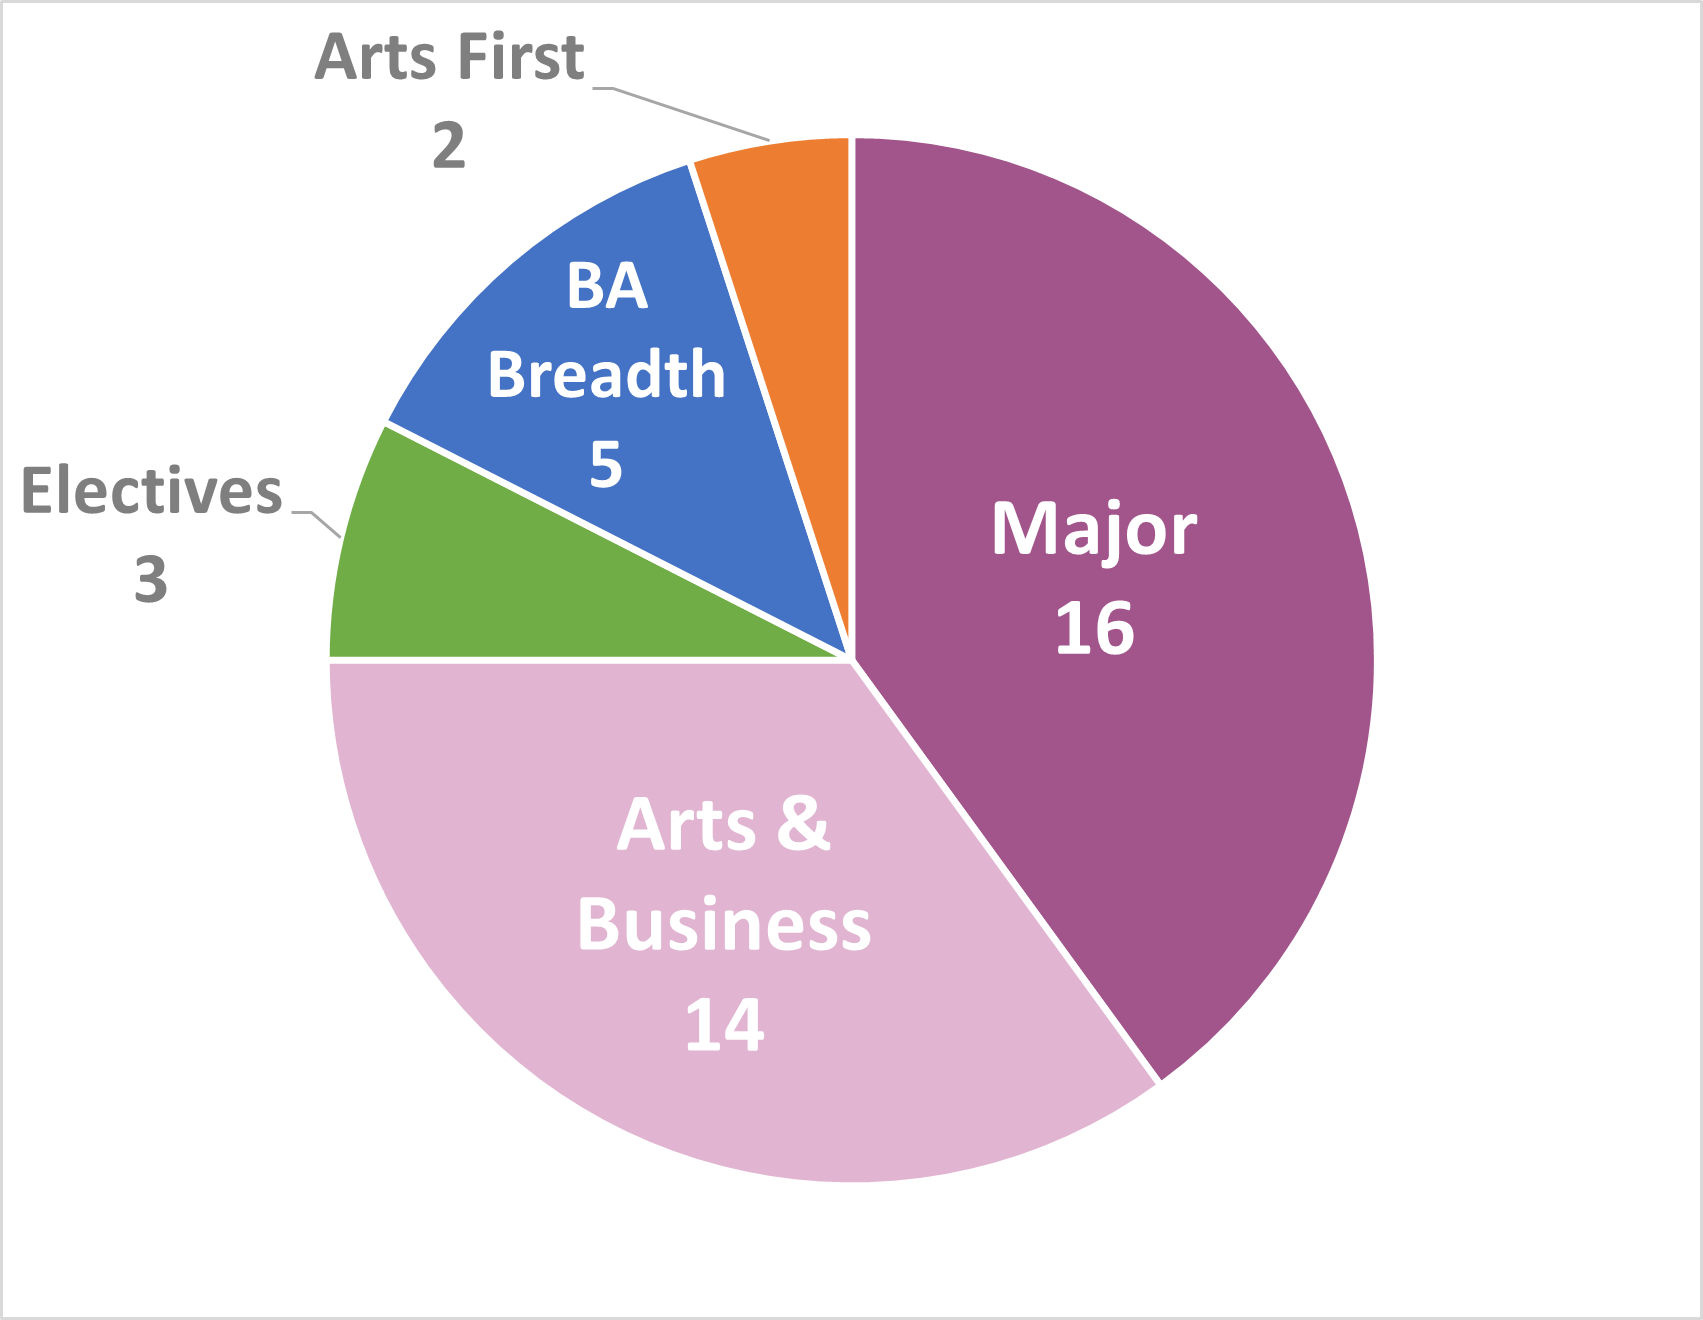 Pie graph displaying the components of a BA degree with arts and business: 5 BA Breadth courses, 2 Arts First courses, 16 major courses, 14 arts and business courses, 3 electives.